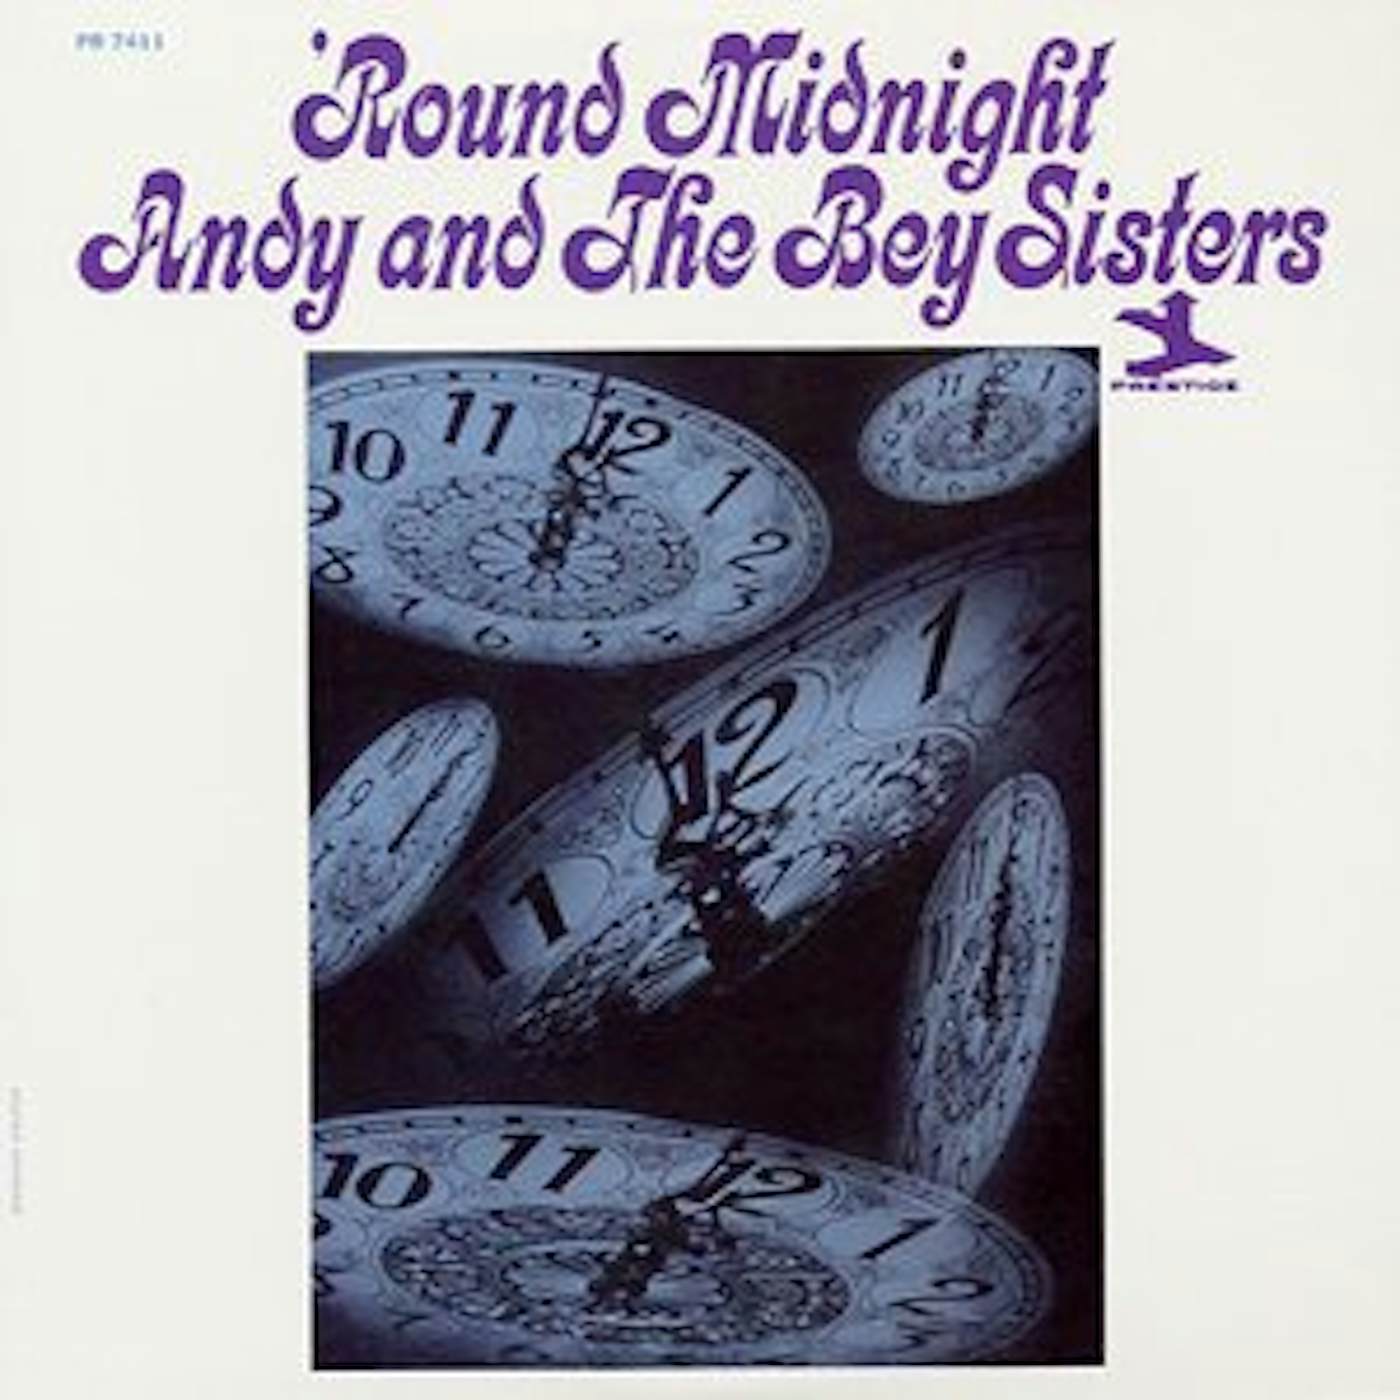 Andy & The Bey Sisters ROUND MIDNIGHT Vinyl Record